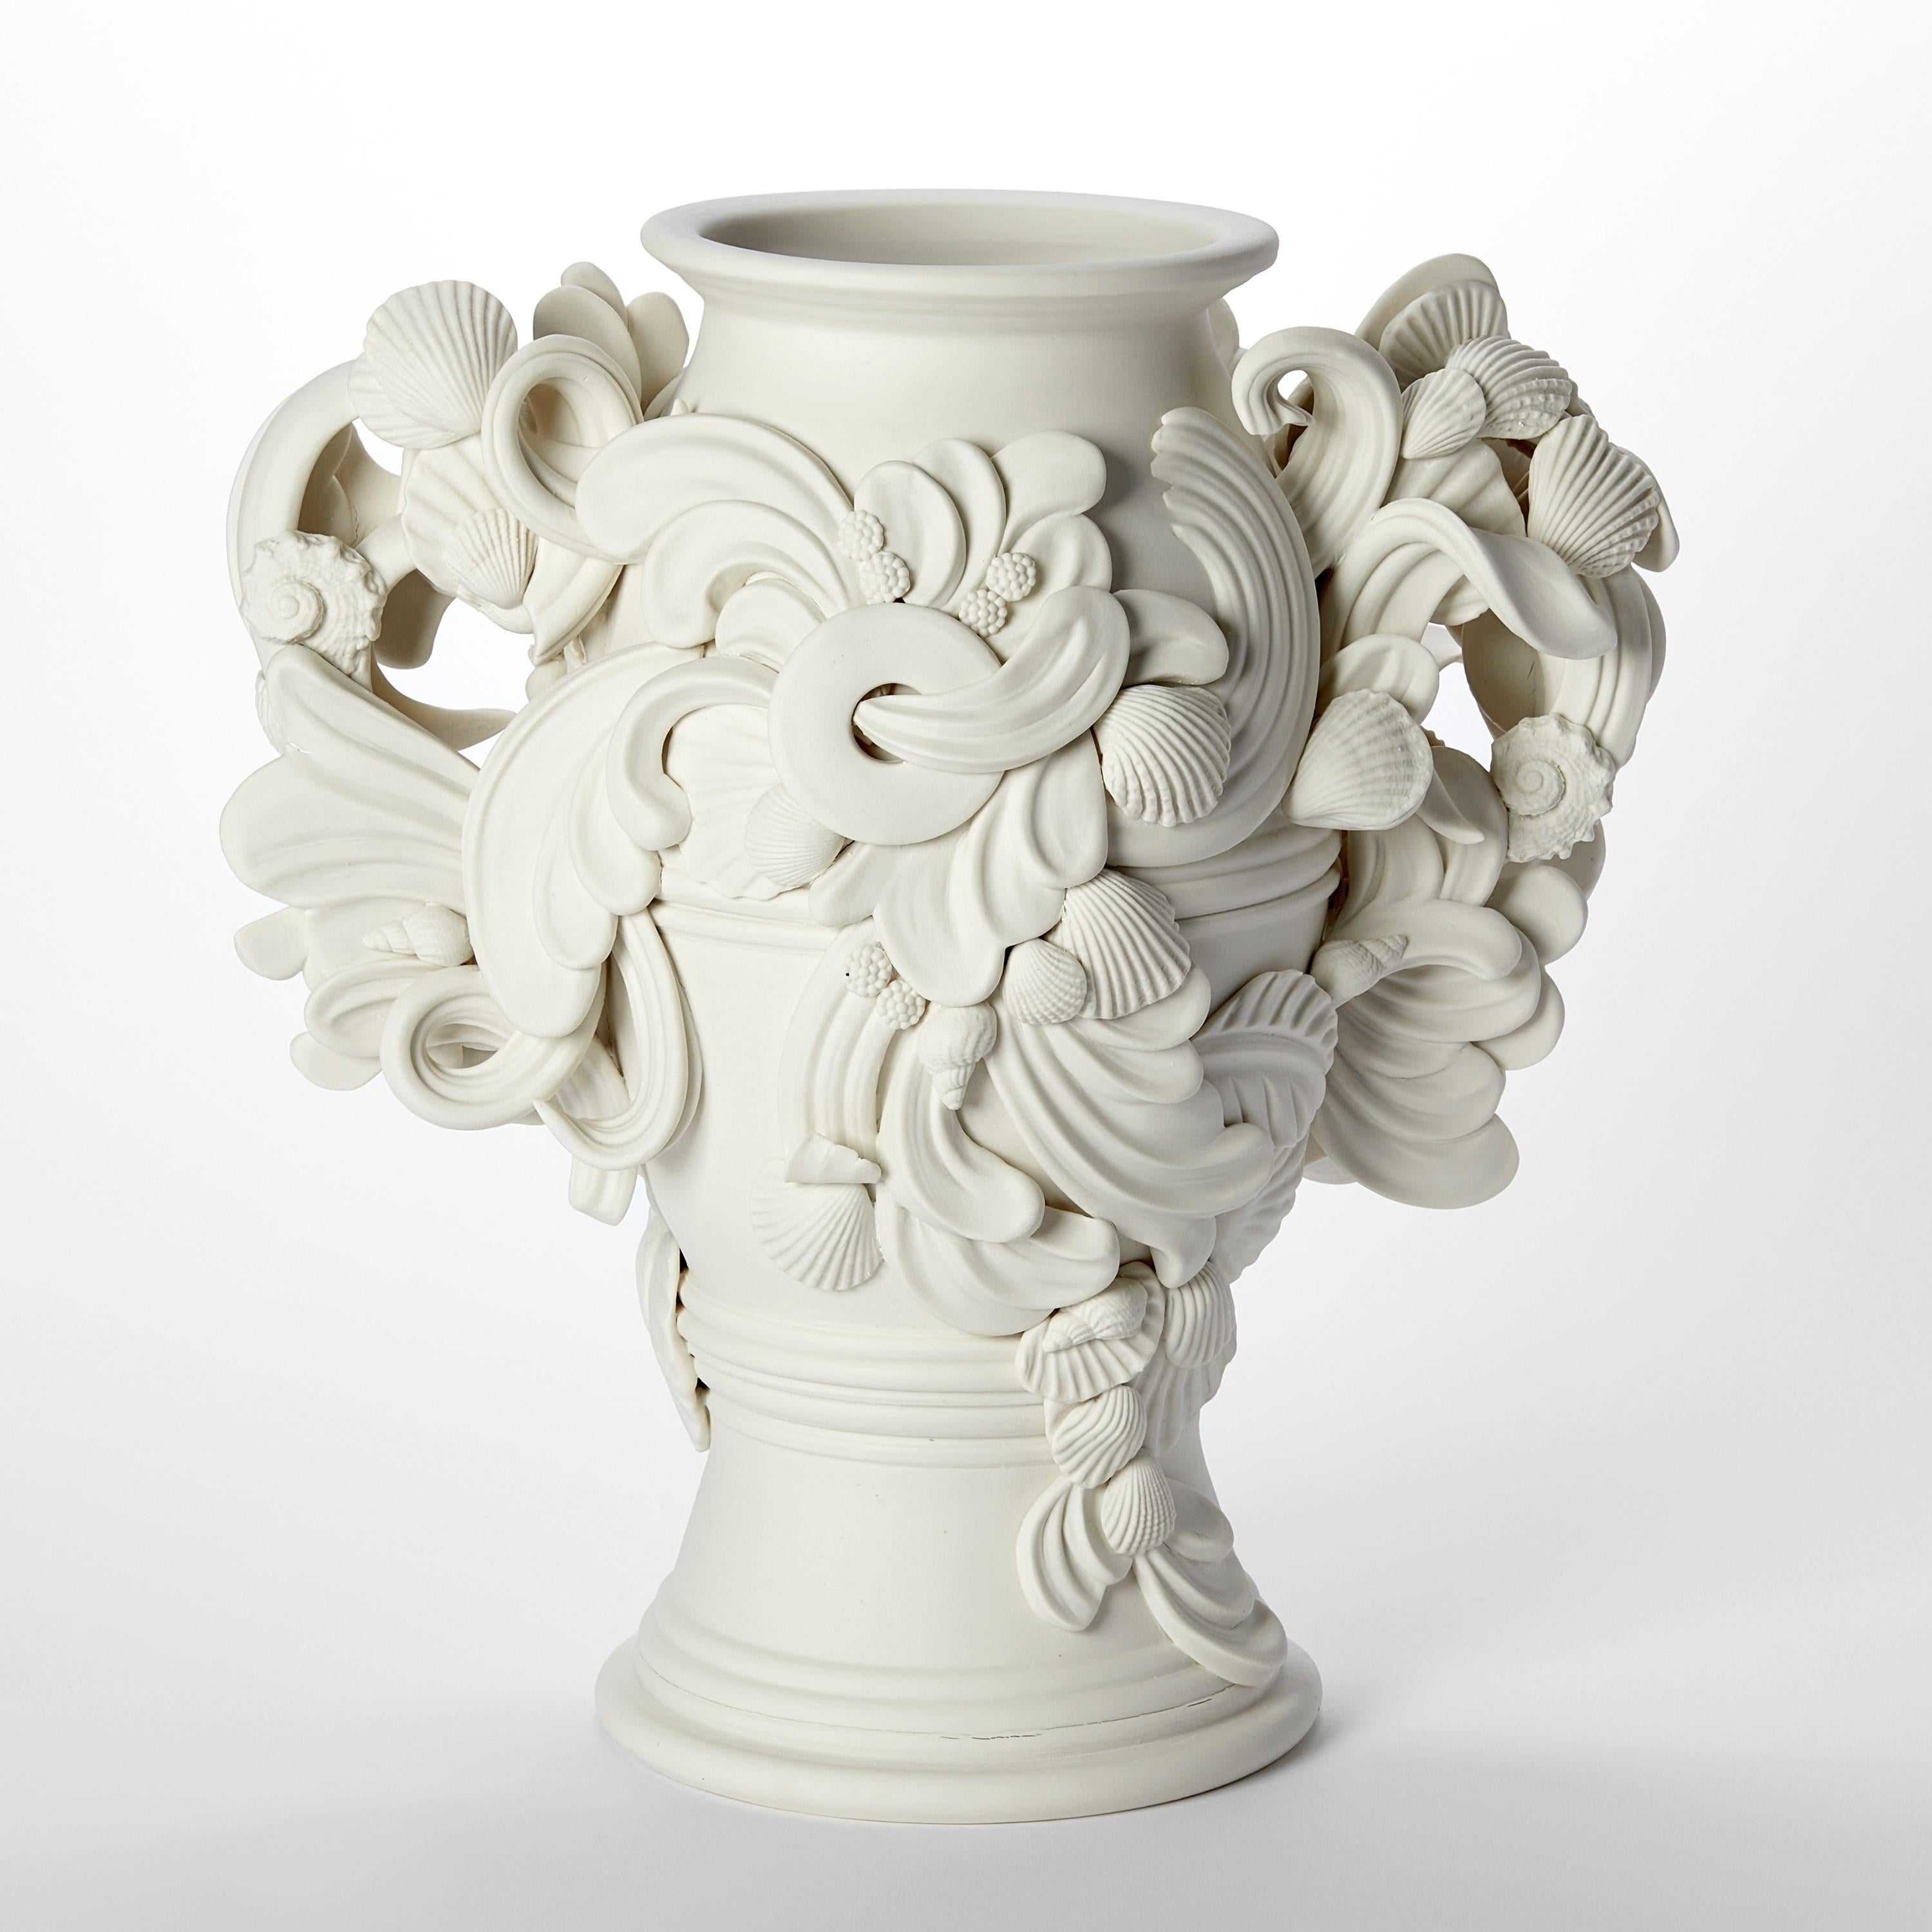 'Rocaille IV’ is a unique porcelain sculpture by the British artist, Jo Taylor.

Taylor’s inspiration comes from highly decorative architectural features such as ornate plaster ceilings, wrought iron and carved stone. Living near the Georgian city